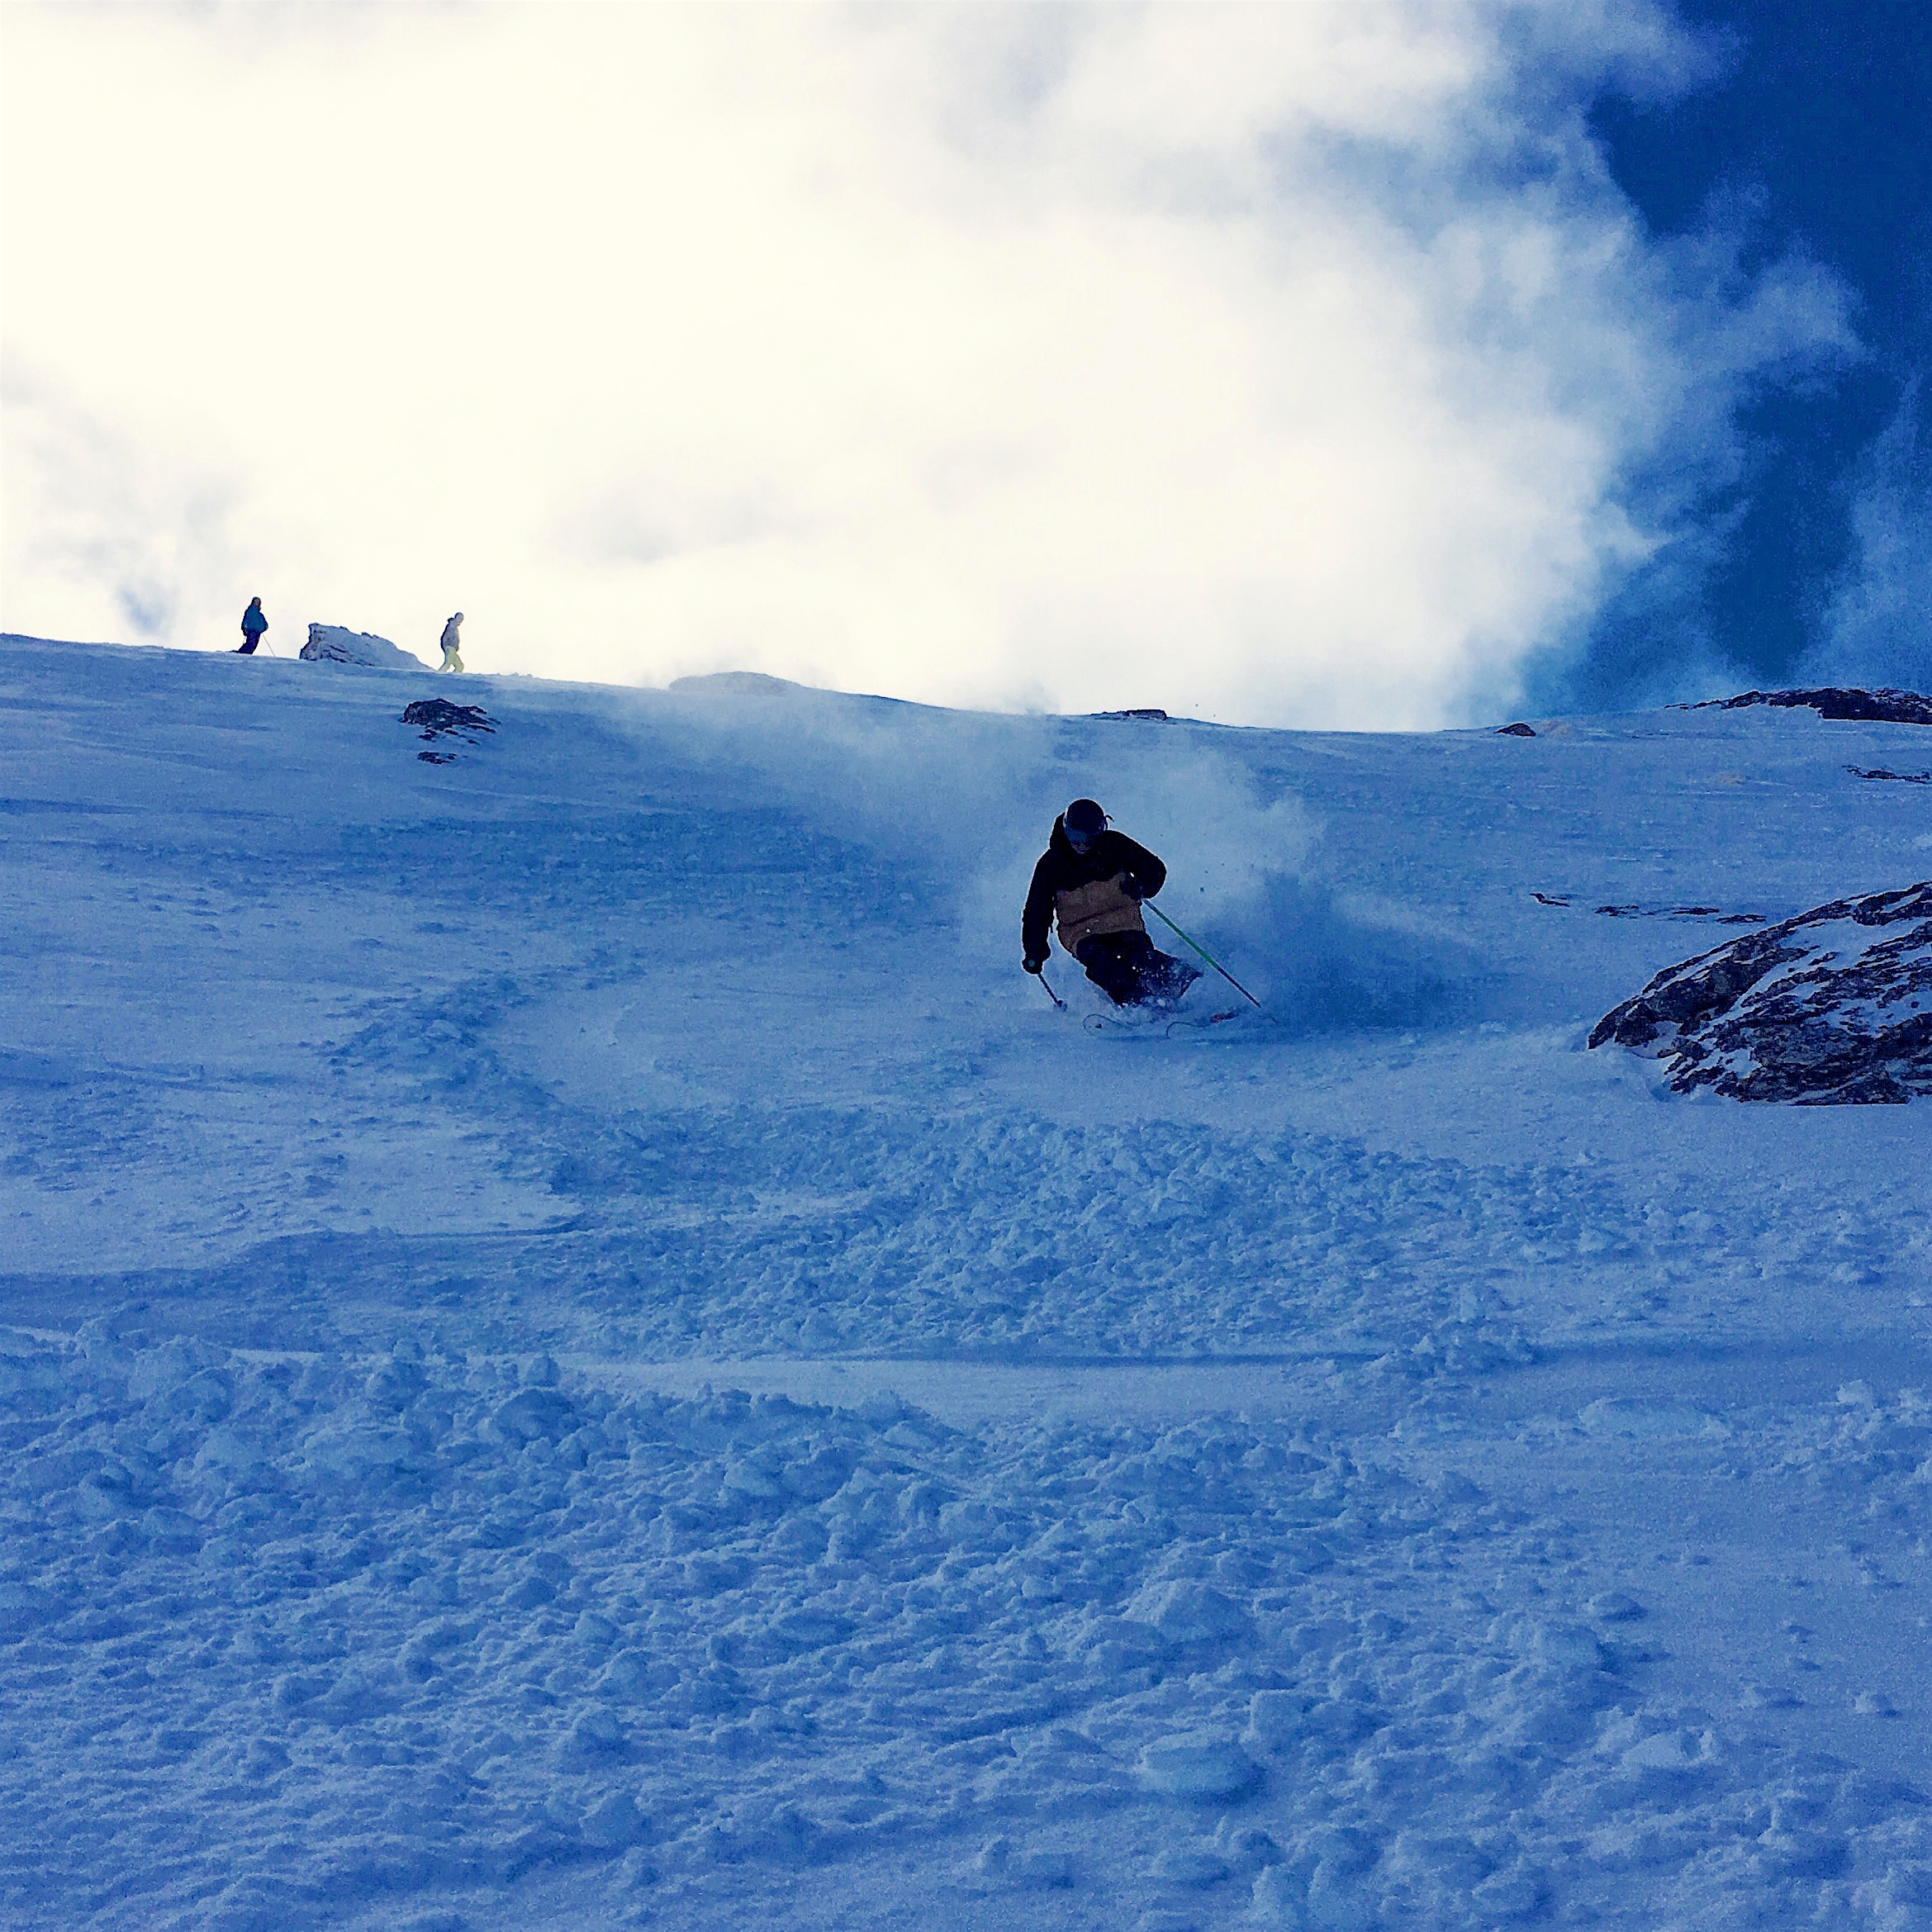 Cardrona on opening weekend. photo: yimmers